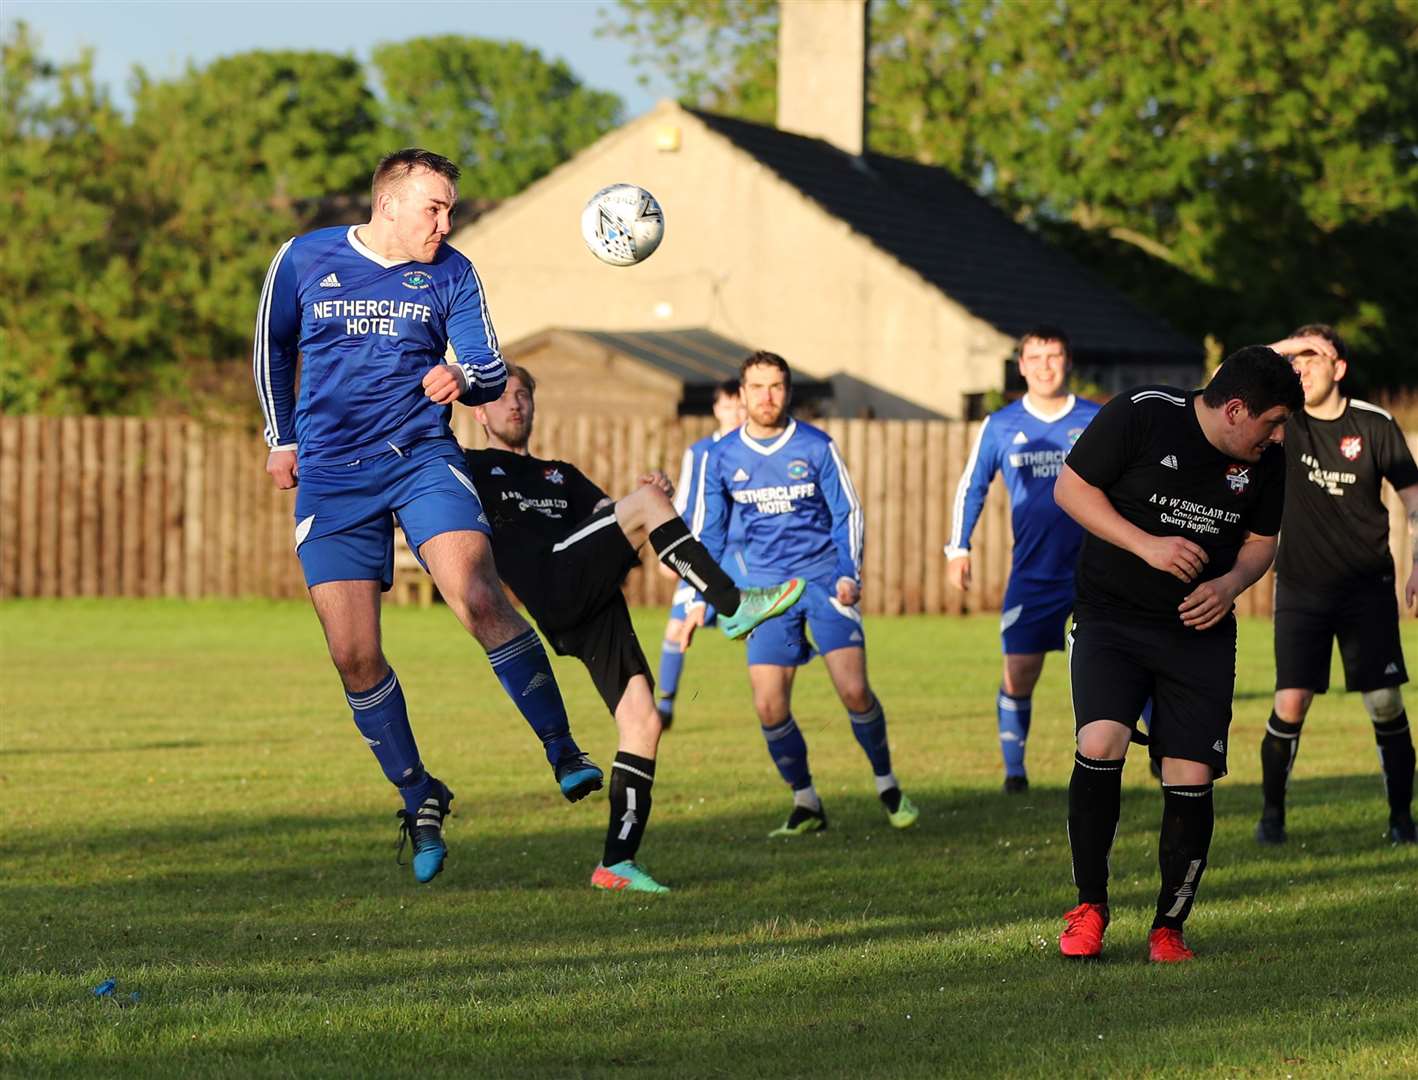 Wick Thistle (in blue) taking on Watten in a Caithness AFA second division match in 2019 – the last time a county league season was played. Picture: James Gunn